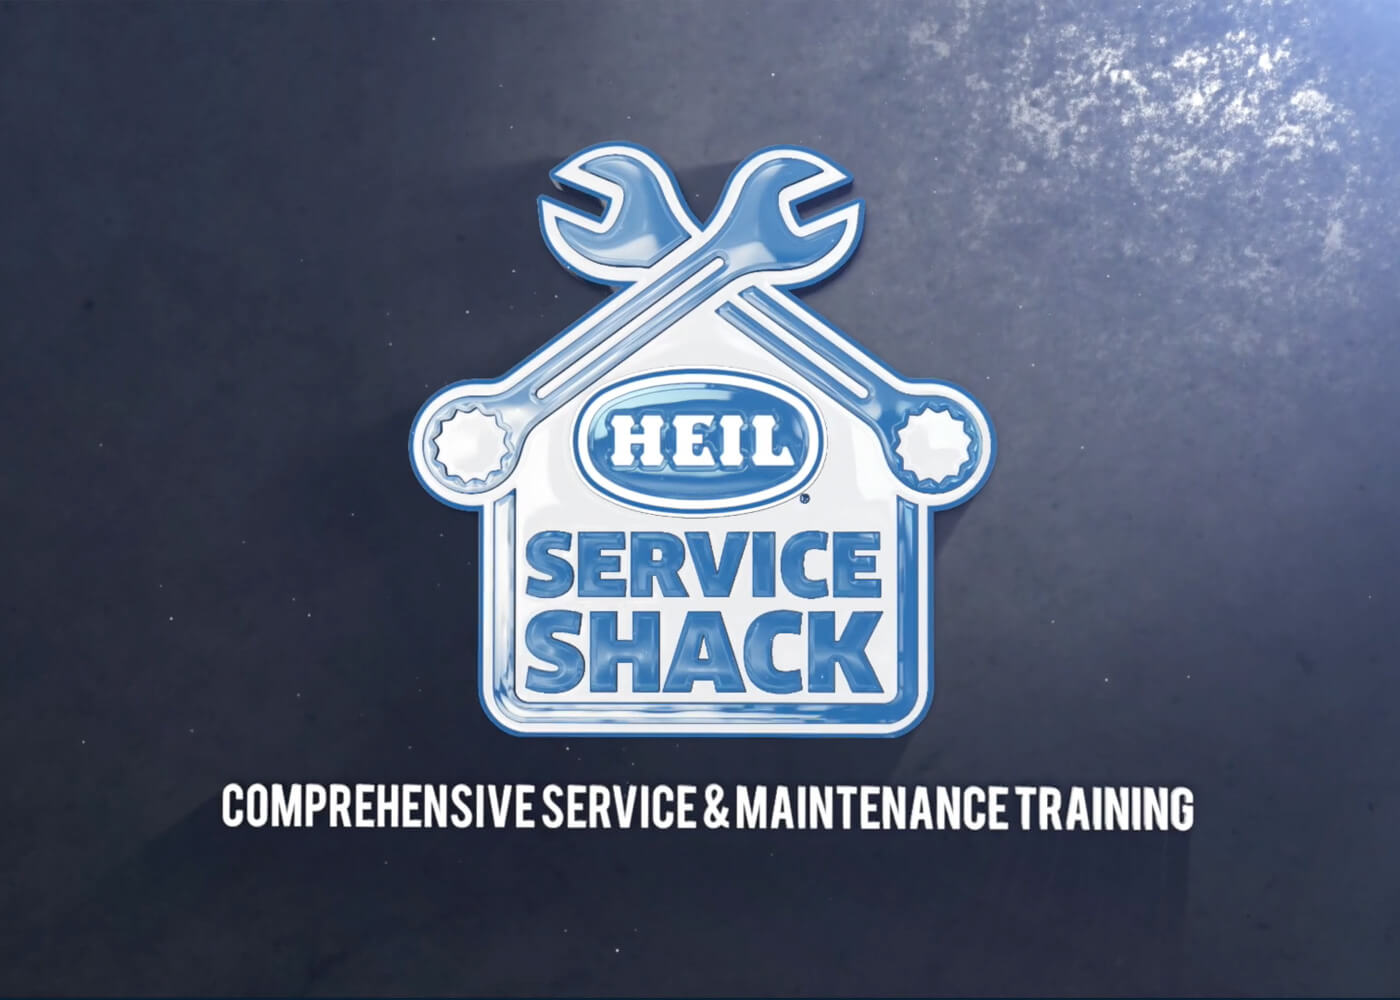 Free Service Shack technical support how-to videos for garbage trucks